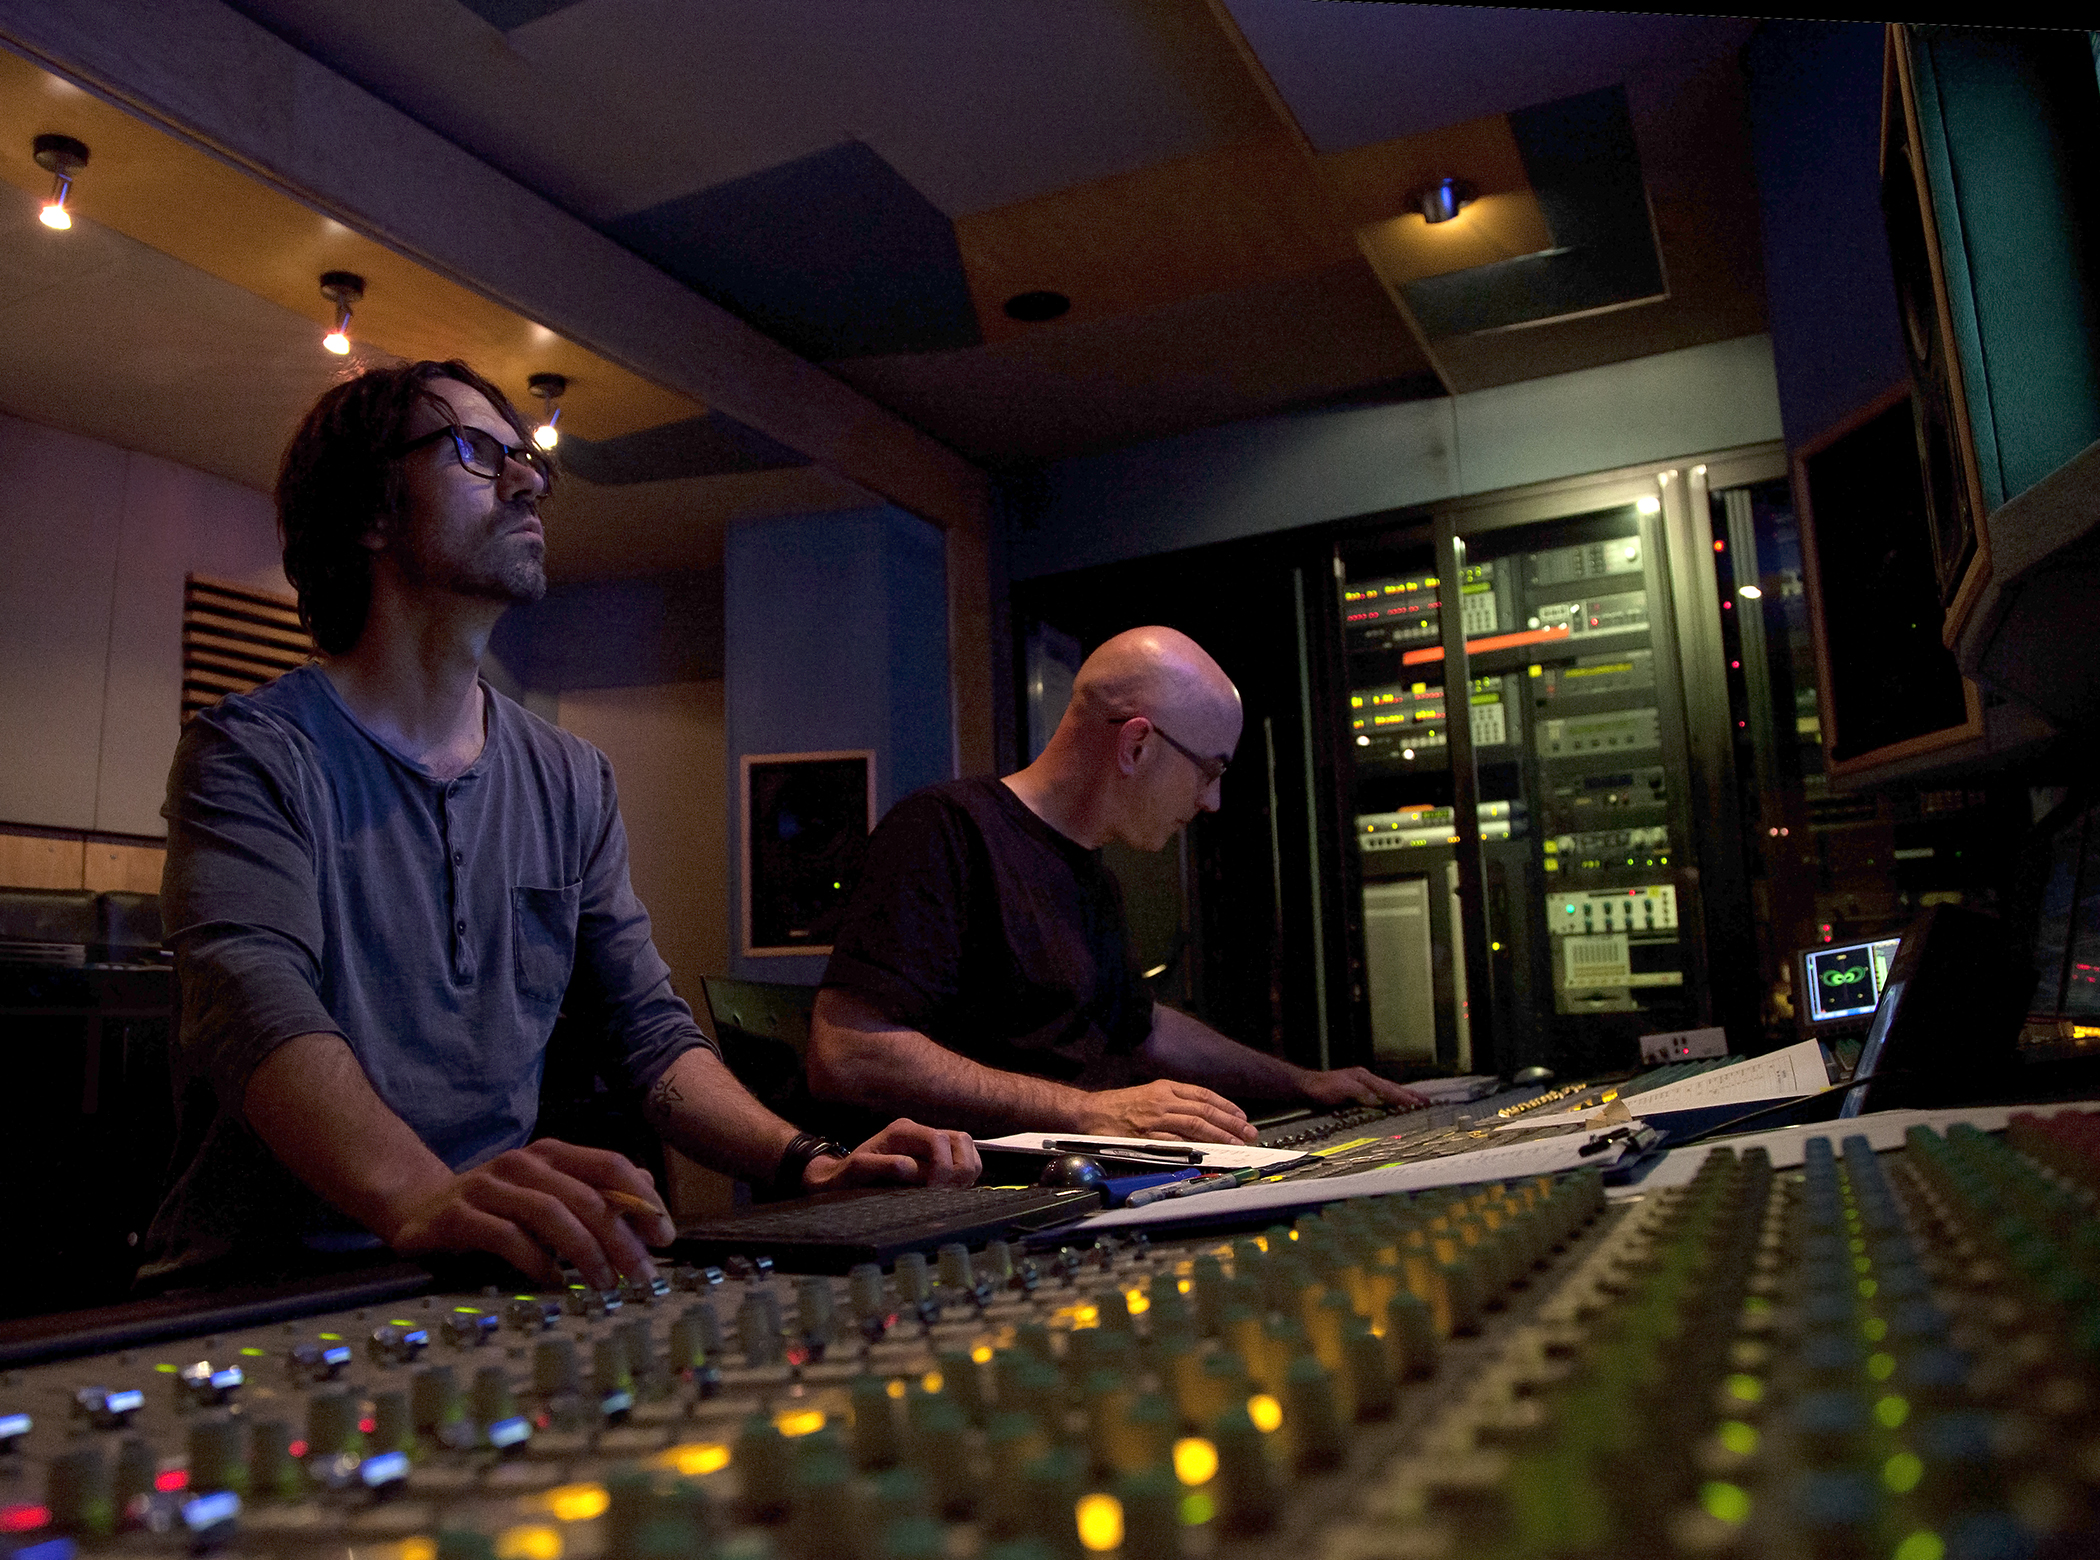 GRAMMY® Award-winning Producer and Mixer David Bottrill and his longtime freelance collaborator, GRAMMY-nominated Engineer, Mixer and Producer Ryan McCambridge, working on the original and Dolby Atmos mixes for Mastodon album - Hushed and Grim